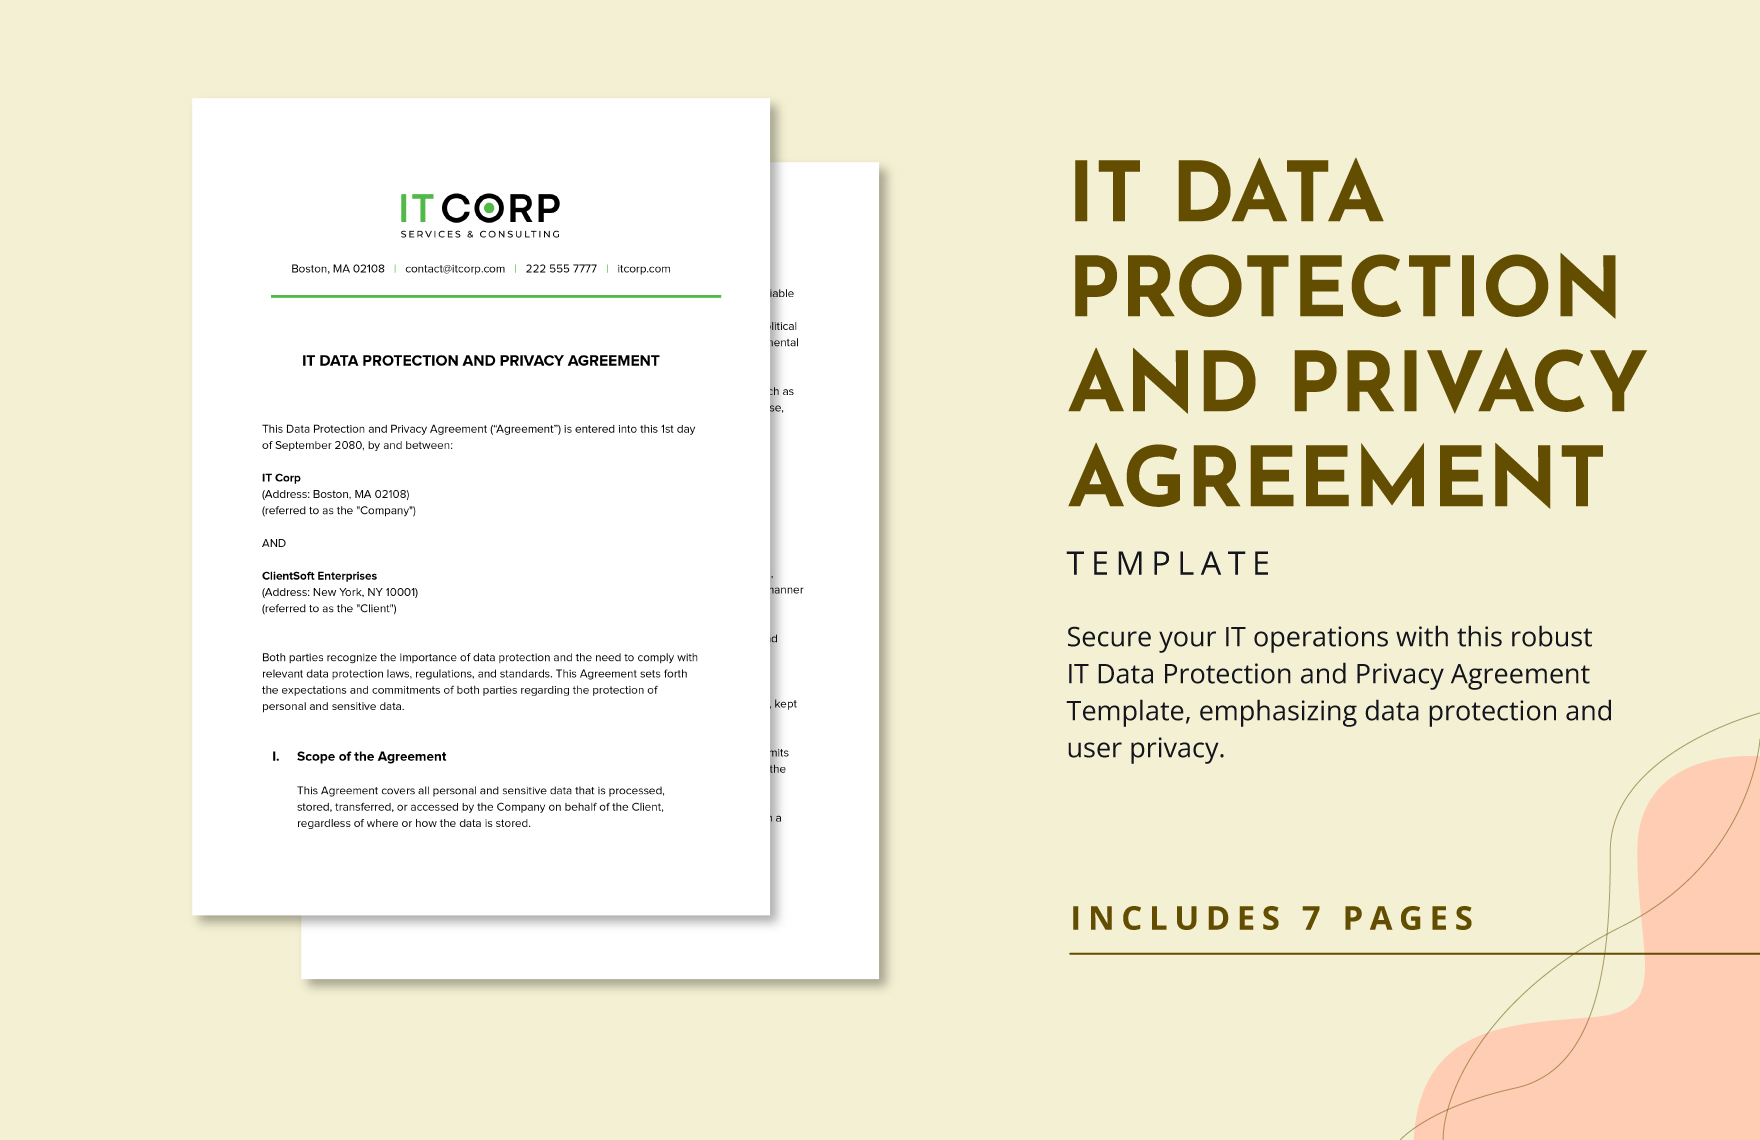 IT Data Protection and Privacy Agreement Template in Word, Google Docs, PDF